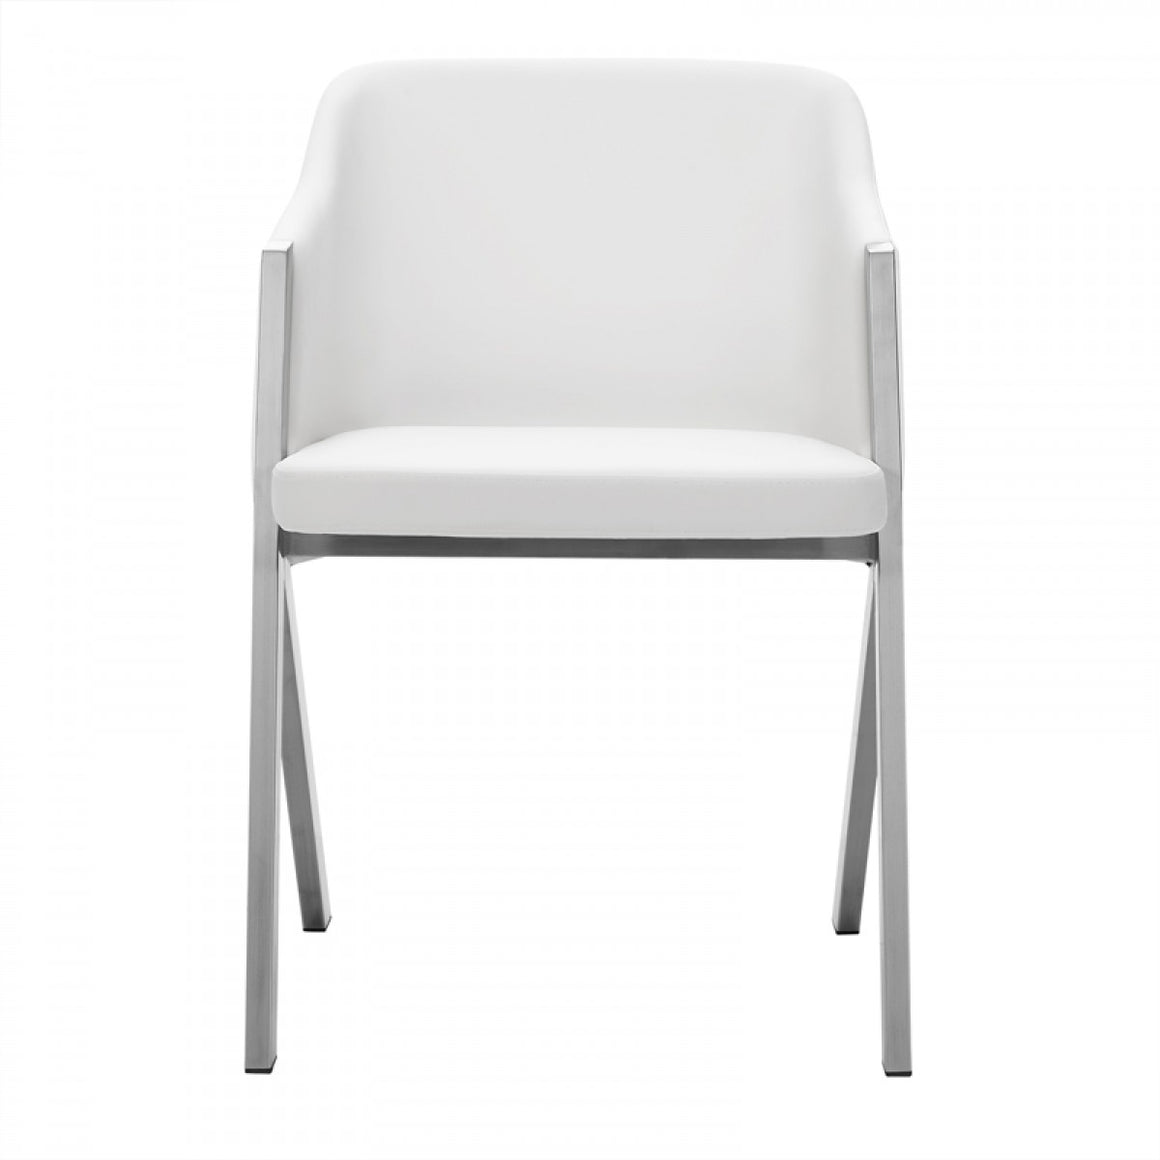 Darcy - Modern White Leatherette Dining Chair (Set of 2)